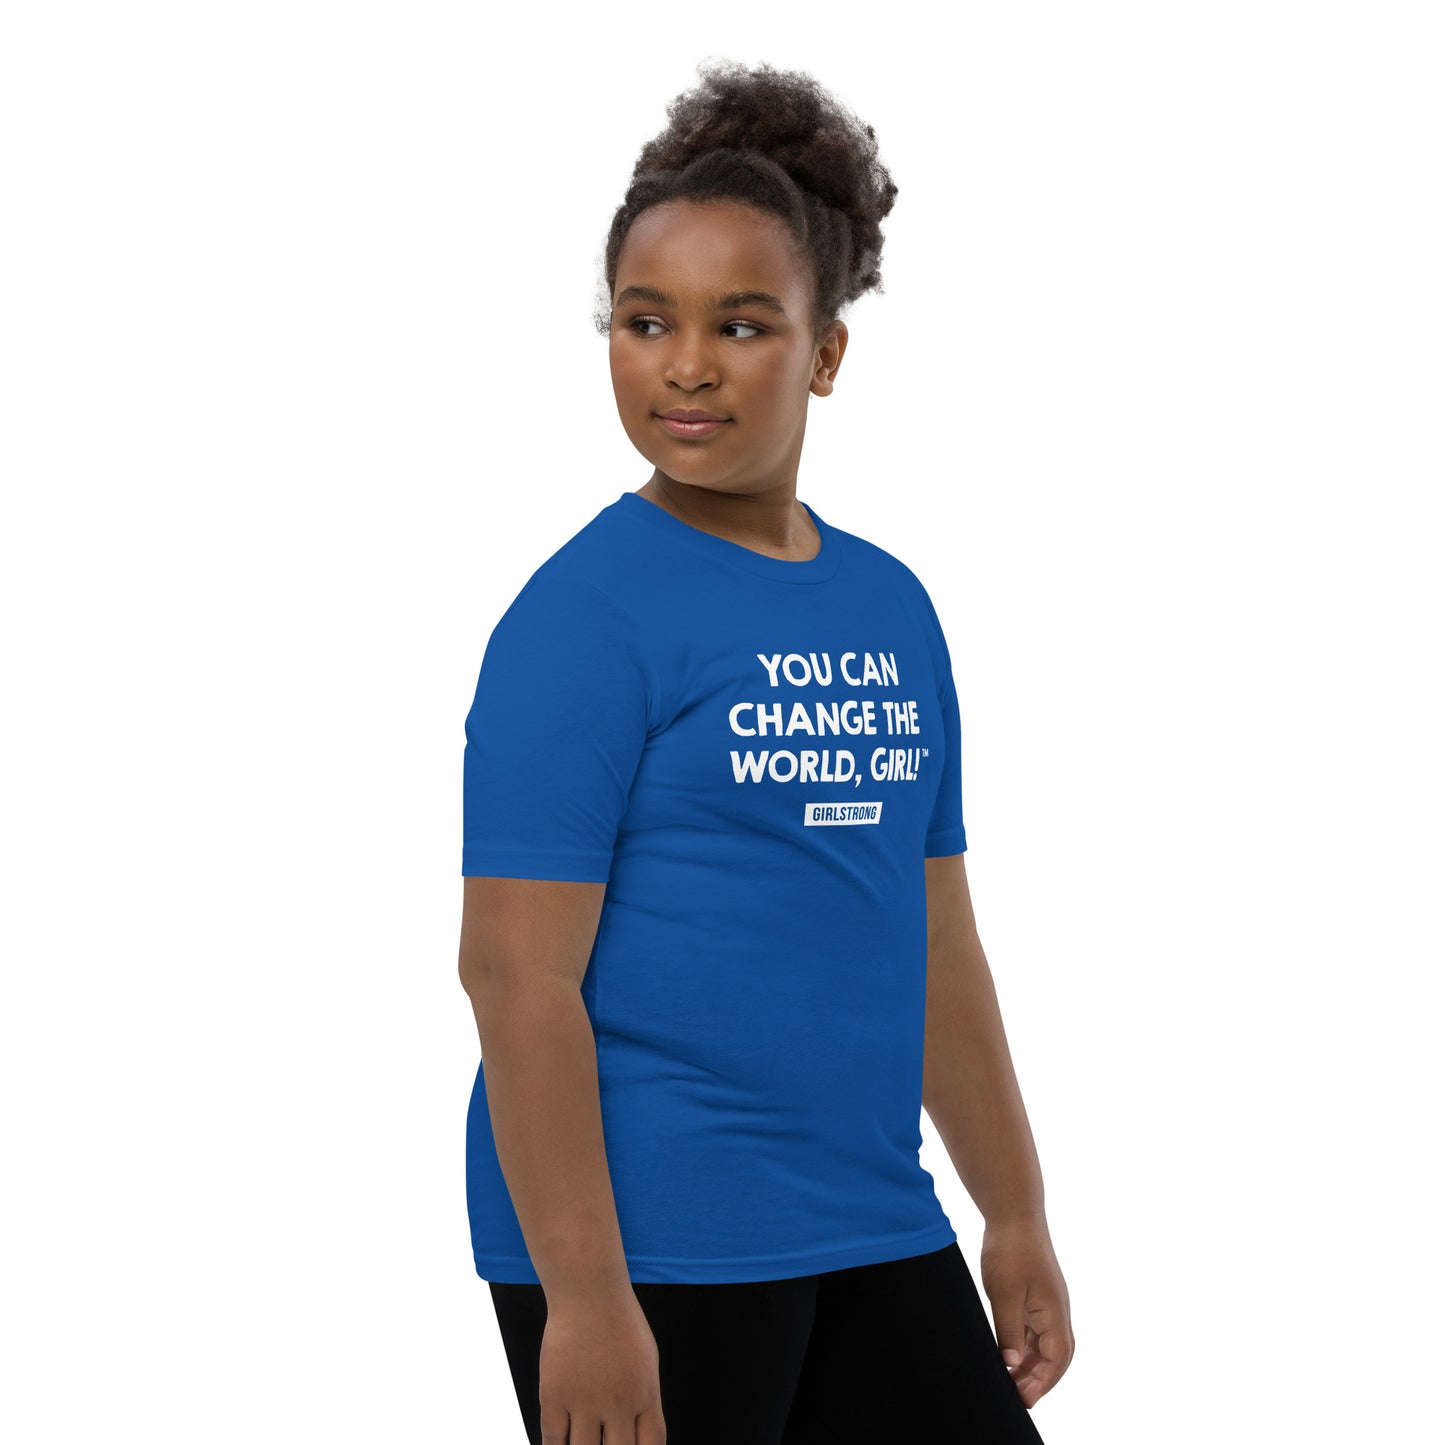 FAVORITE PRINCESS TRUE ROYAL BLUE TEE - YOU CAN CHANGE THE WORLD, GIRL! GIRLSTRONG